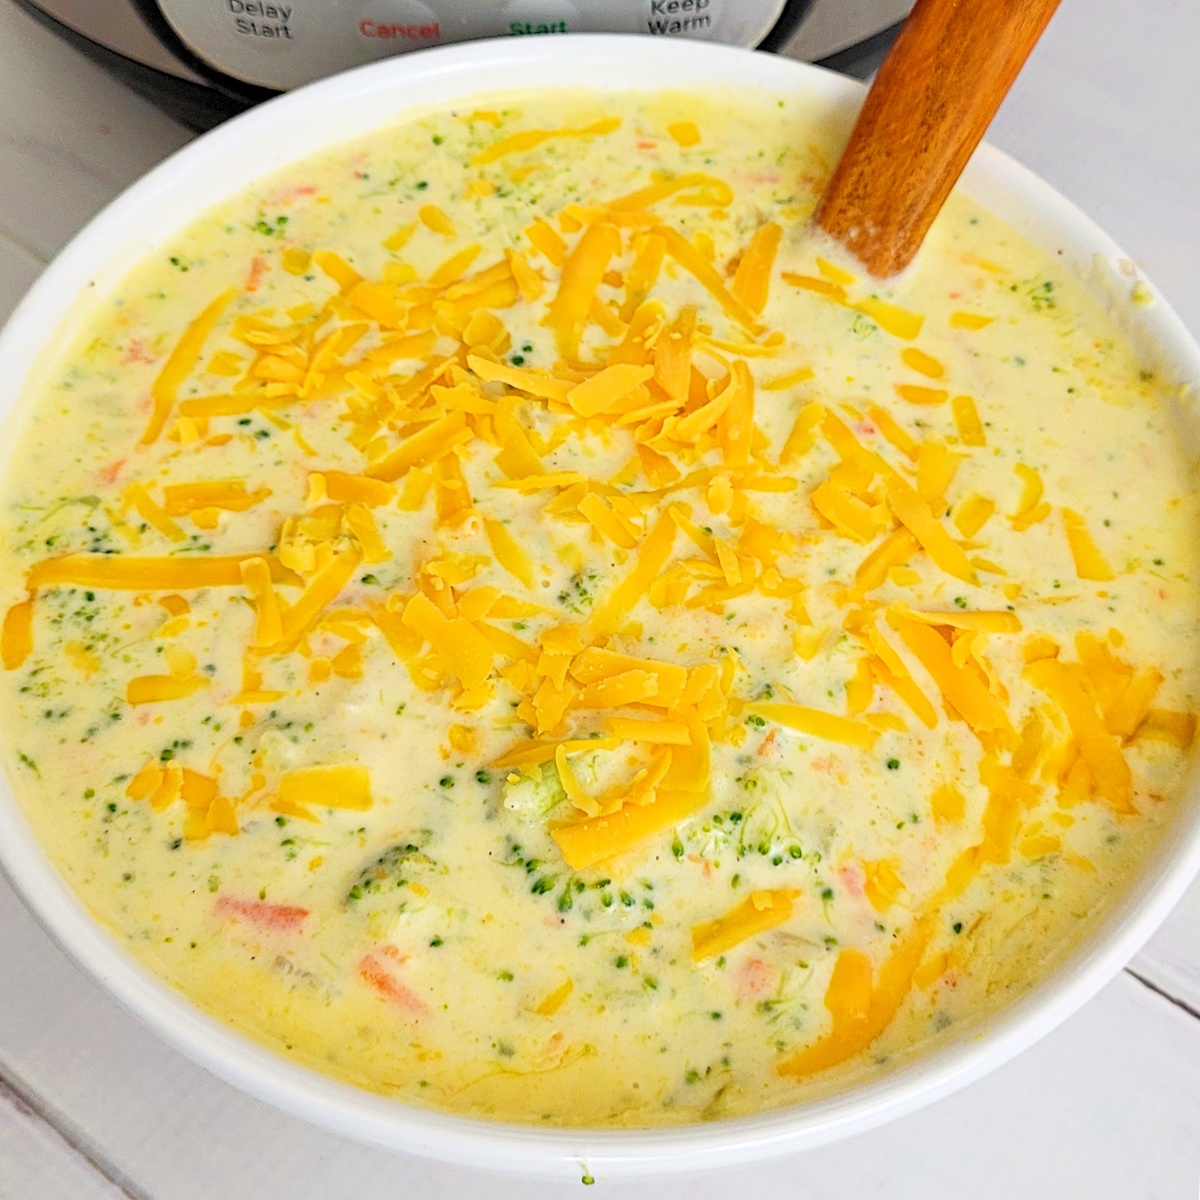 Bowl of Instant Pot Broccoli Cheese Soup with Chicken on an orange runner ready to eat